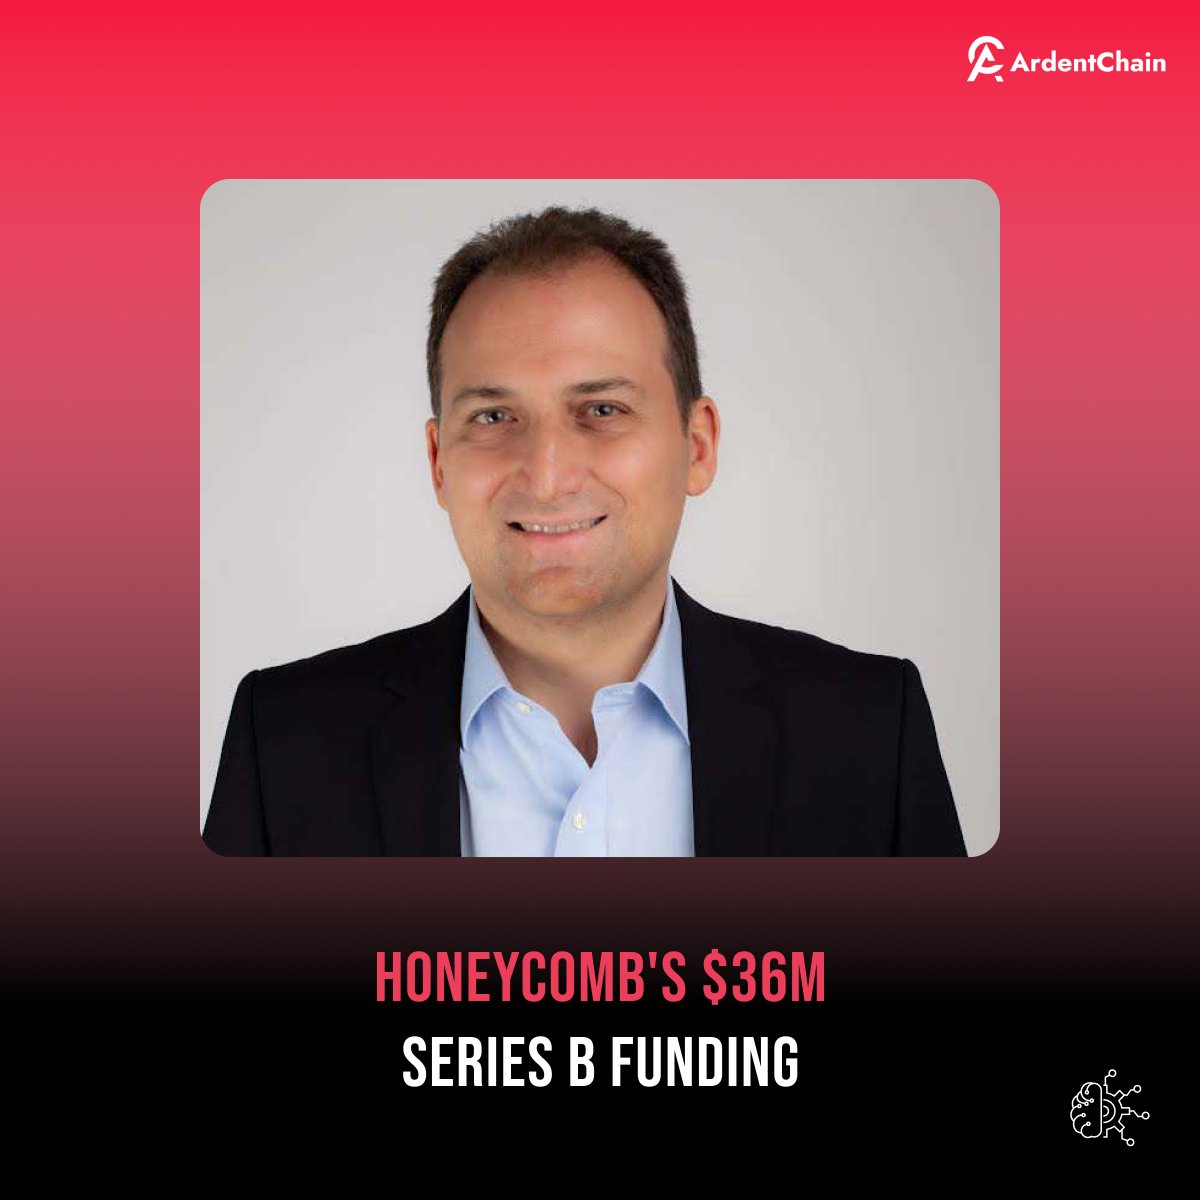 @honeycombins raises $36M in Series B led by Oren Zeev. With AI-driven property insurance, they plan to expand, develop new products, and enter new markets, targeting disruption in a fragmented industry.

#HoneycombInsurance #SeriesBFunding